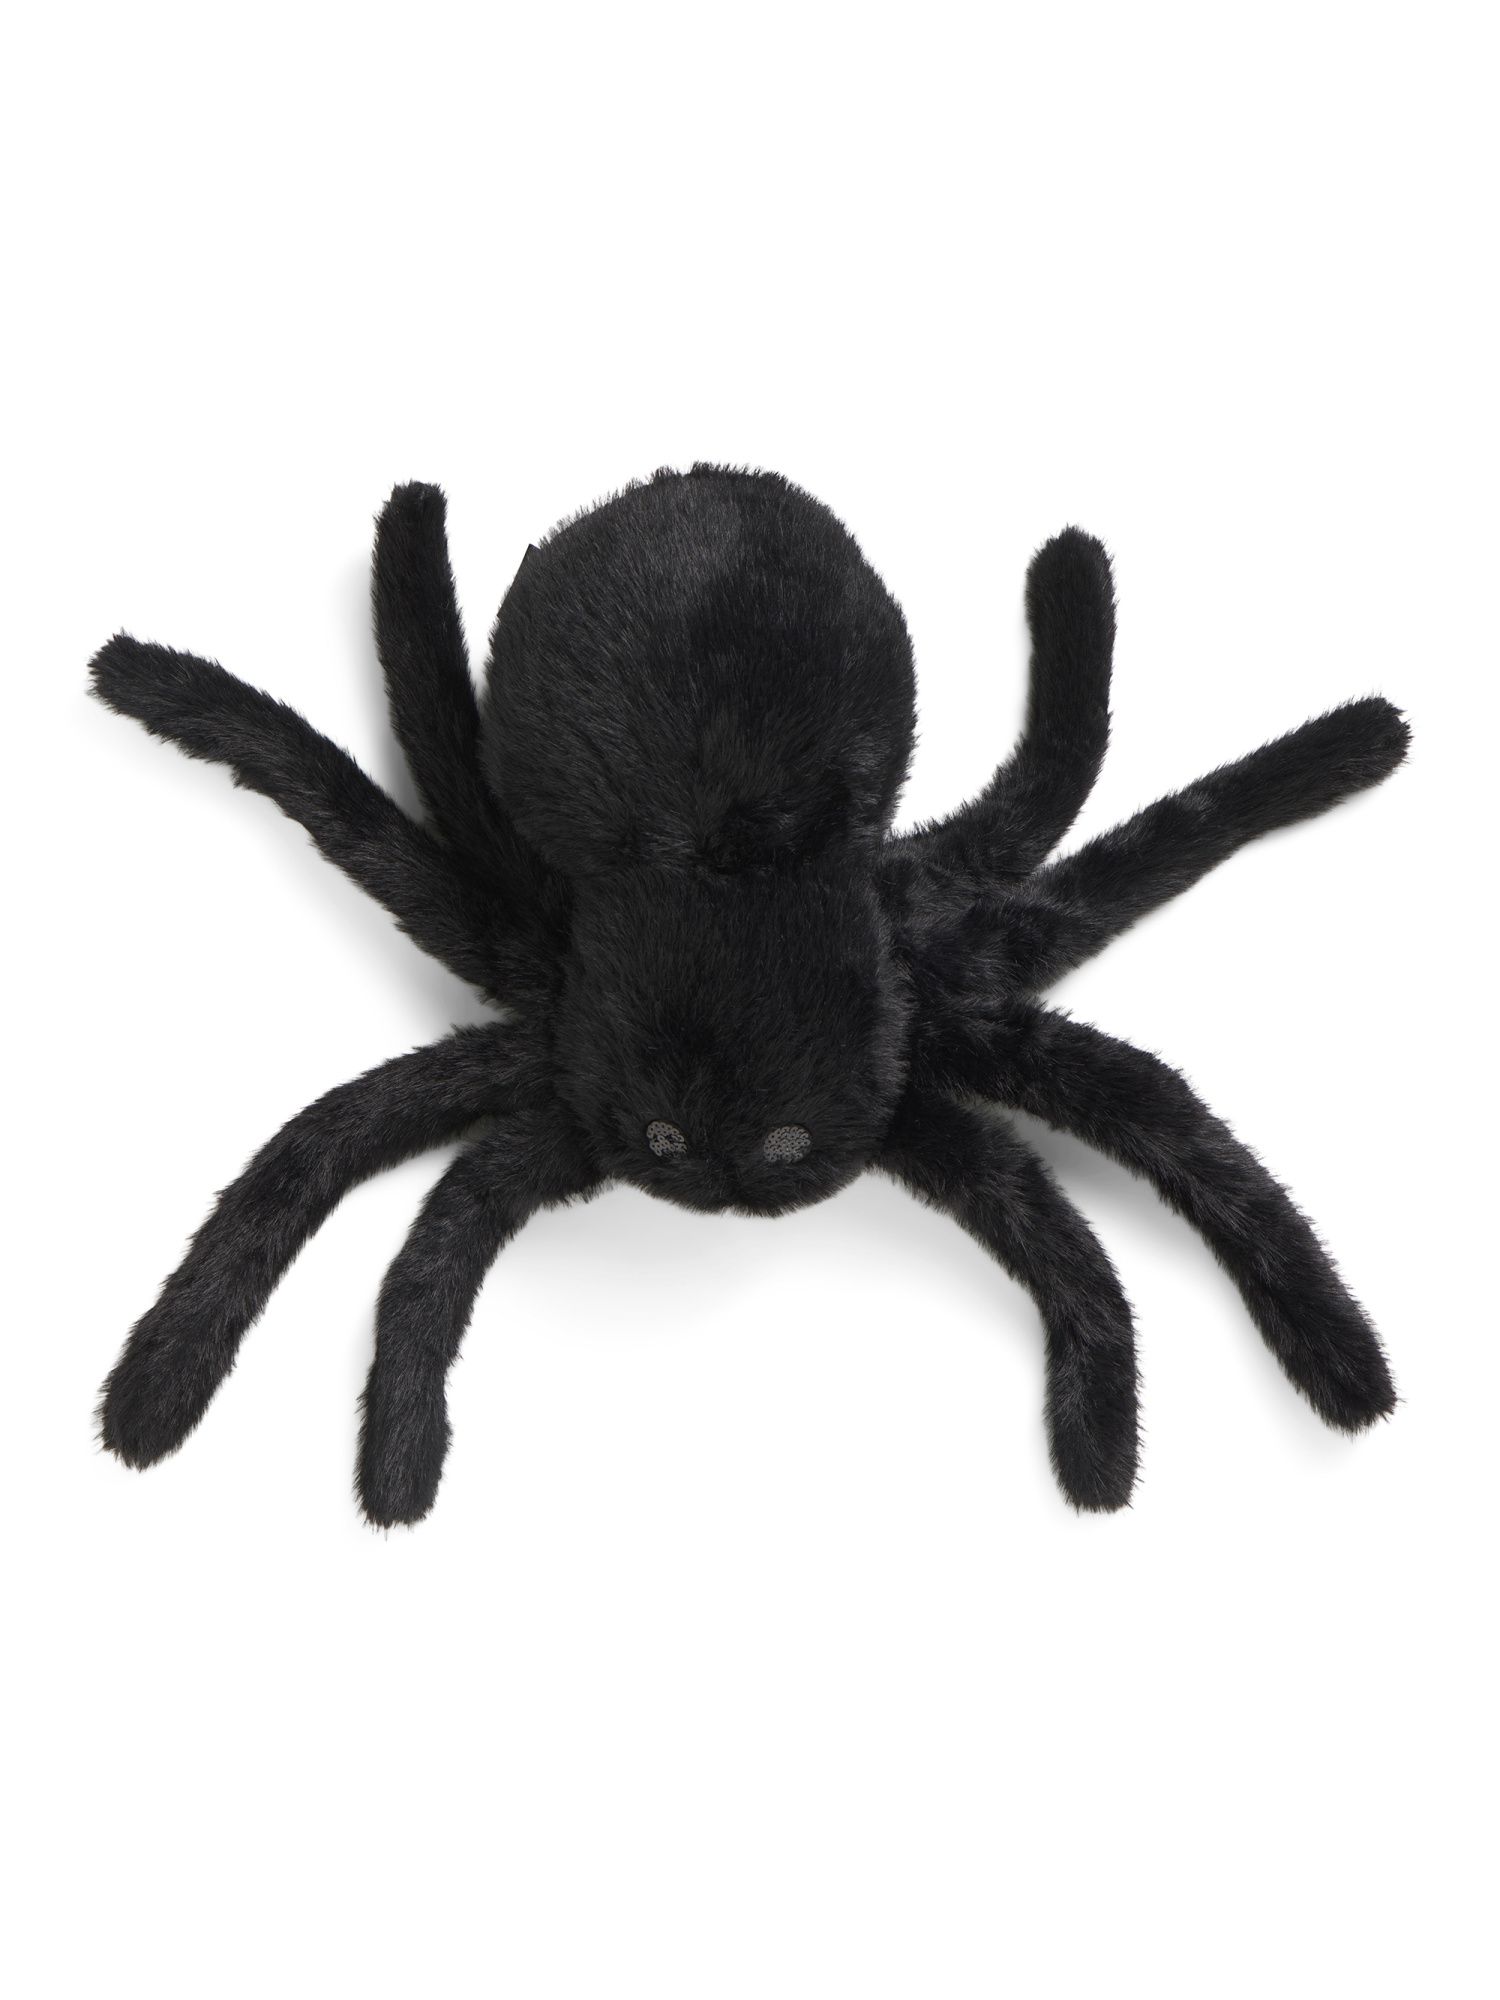 9x17 Oversized Faux Fur Spider Pillow | Marshalls